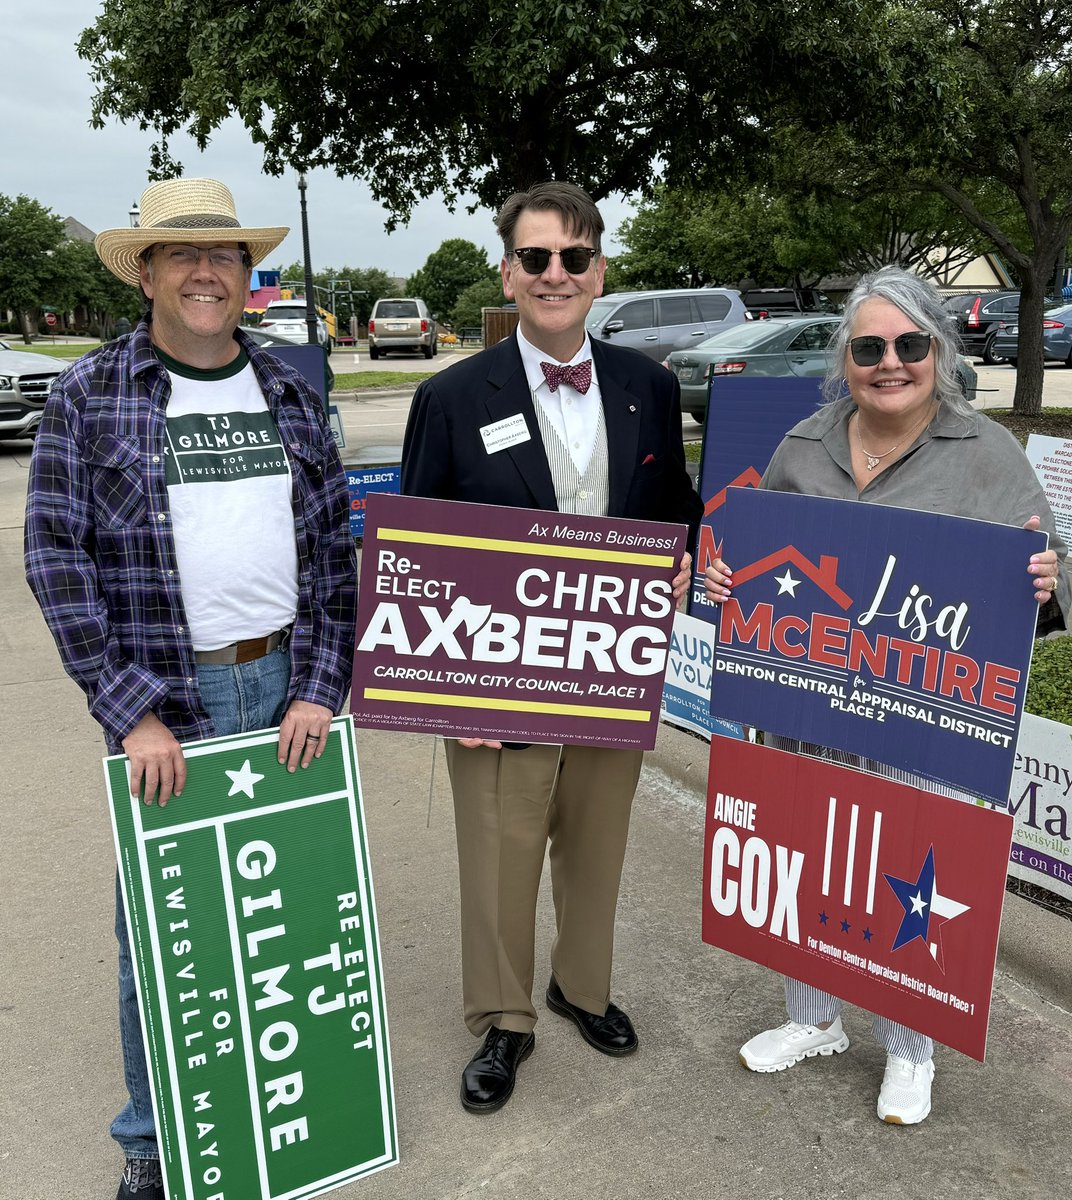 It’s Election Day! Out supporting my favorite candidates today at Queen Margaret Community Center until 7:00 pm. Appraisal District: Angie Cox Lisa McEntire Rick Guzman City of Lewisville: Mayor TJ Gilmore Council William J Meridith City of Carrollton: Council Nancy Straub…